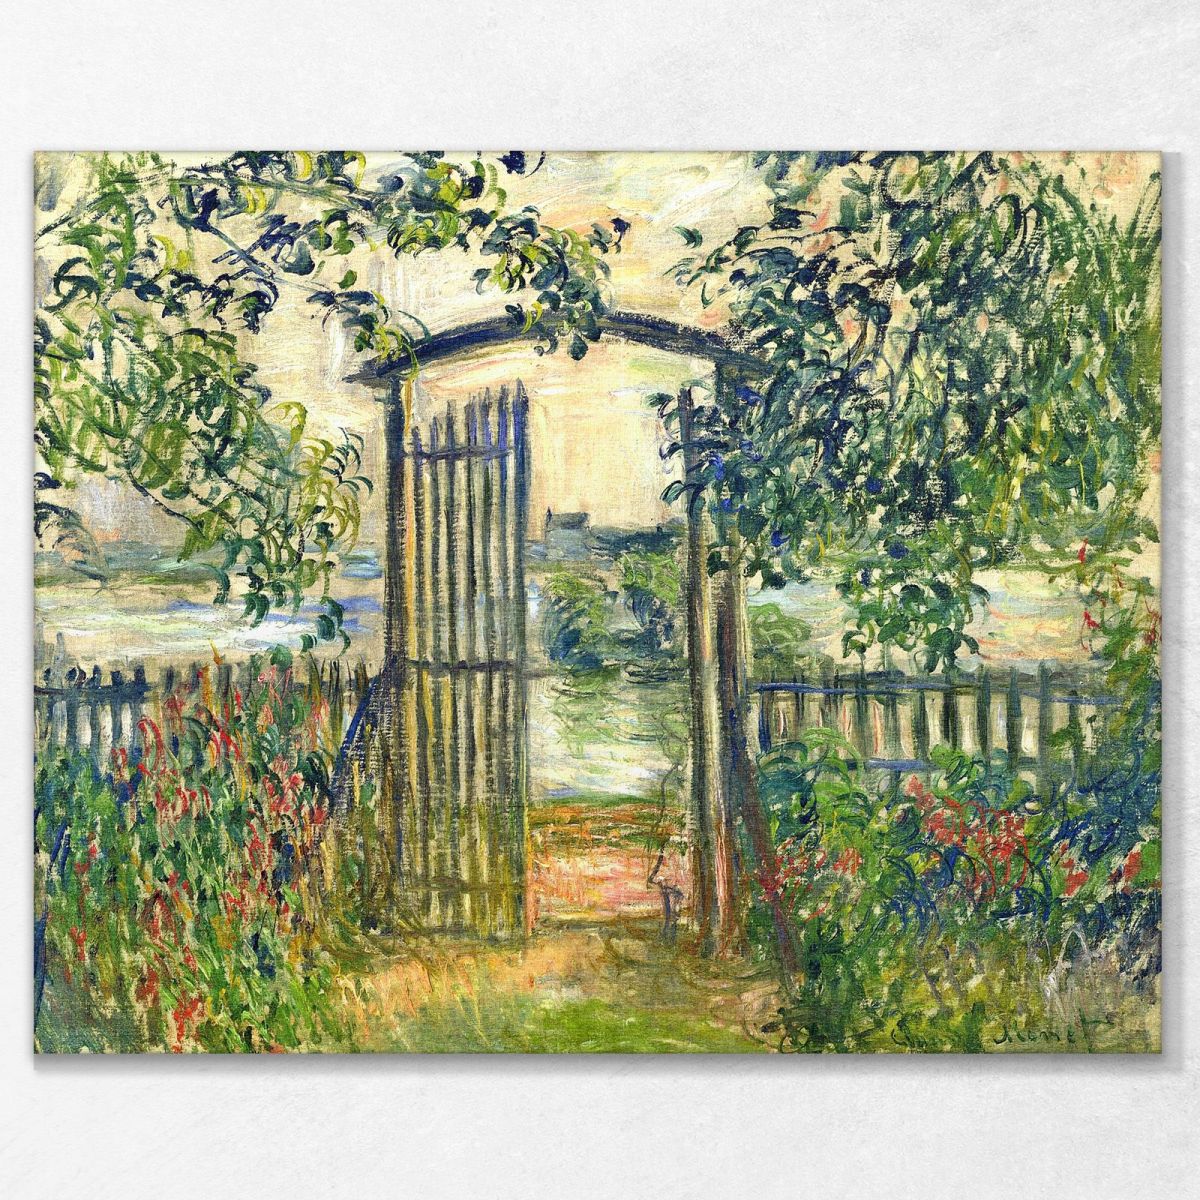 The Garden Gate At Vetheuil, 1881 Monet Claude canvas print mnt73